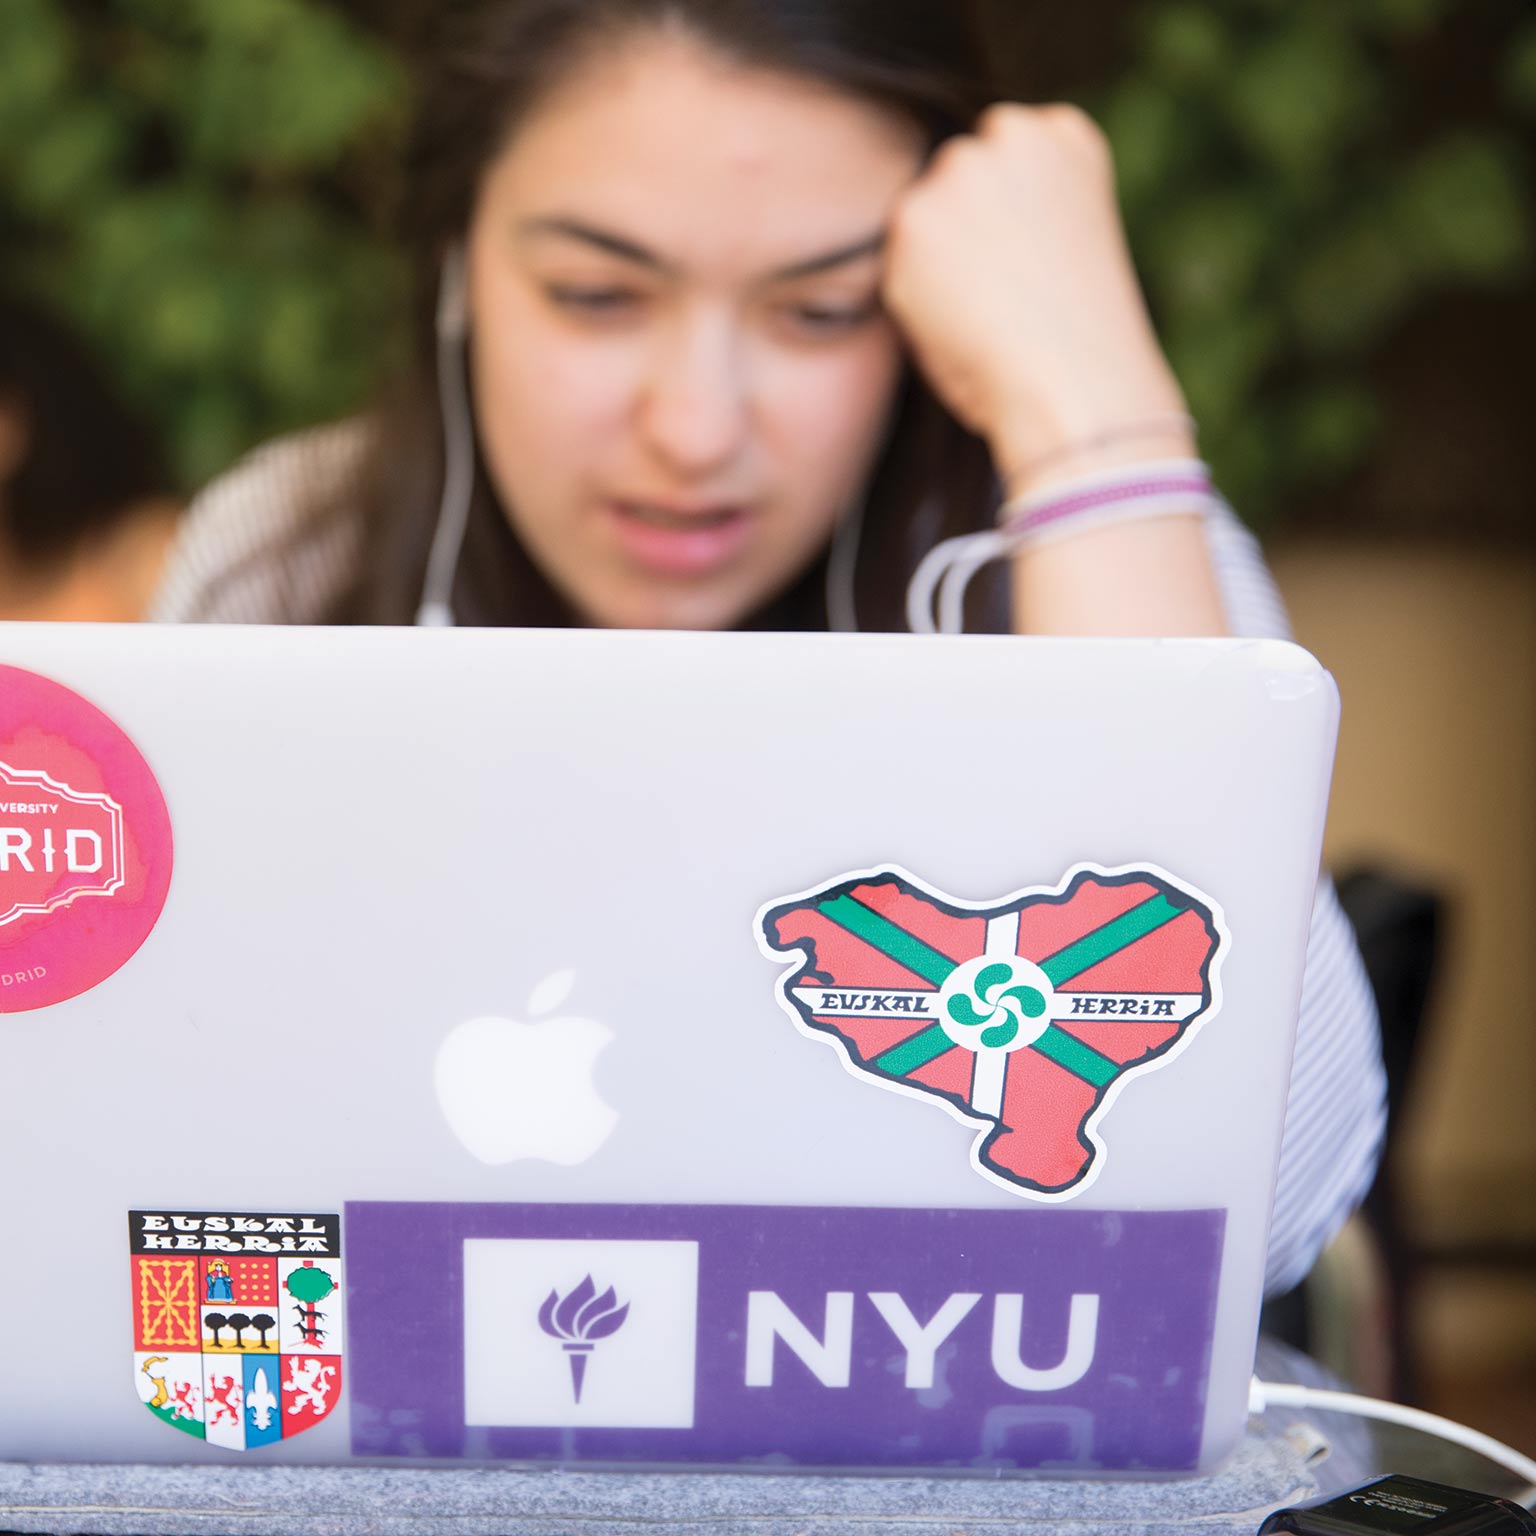 A student looking at laptop with NYU sticker visible on back.